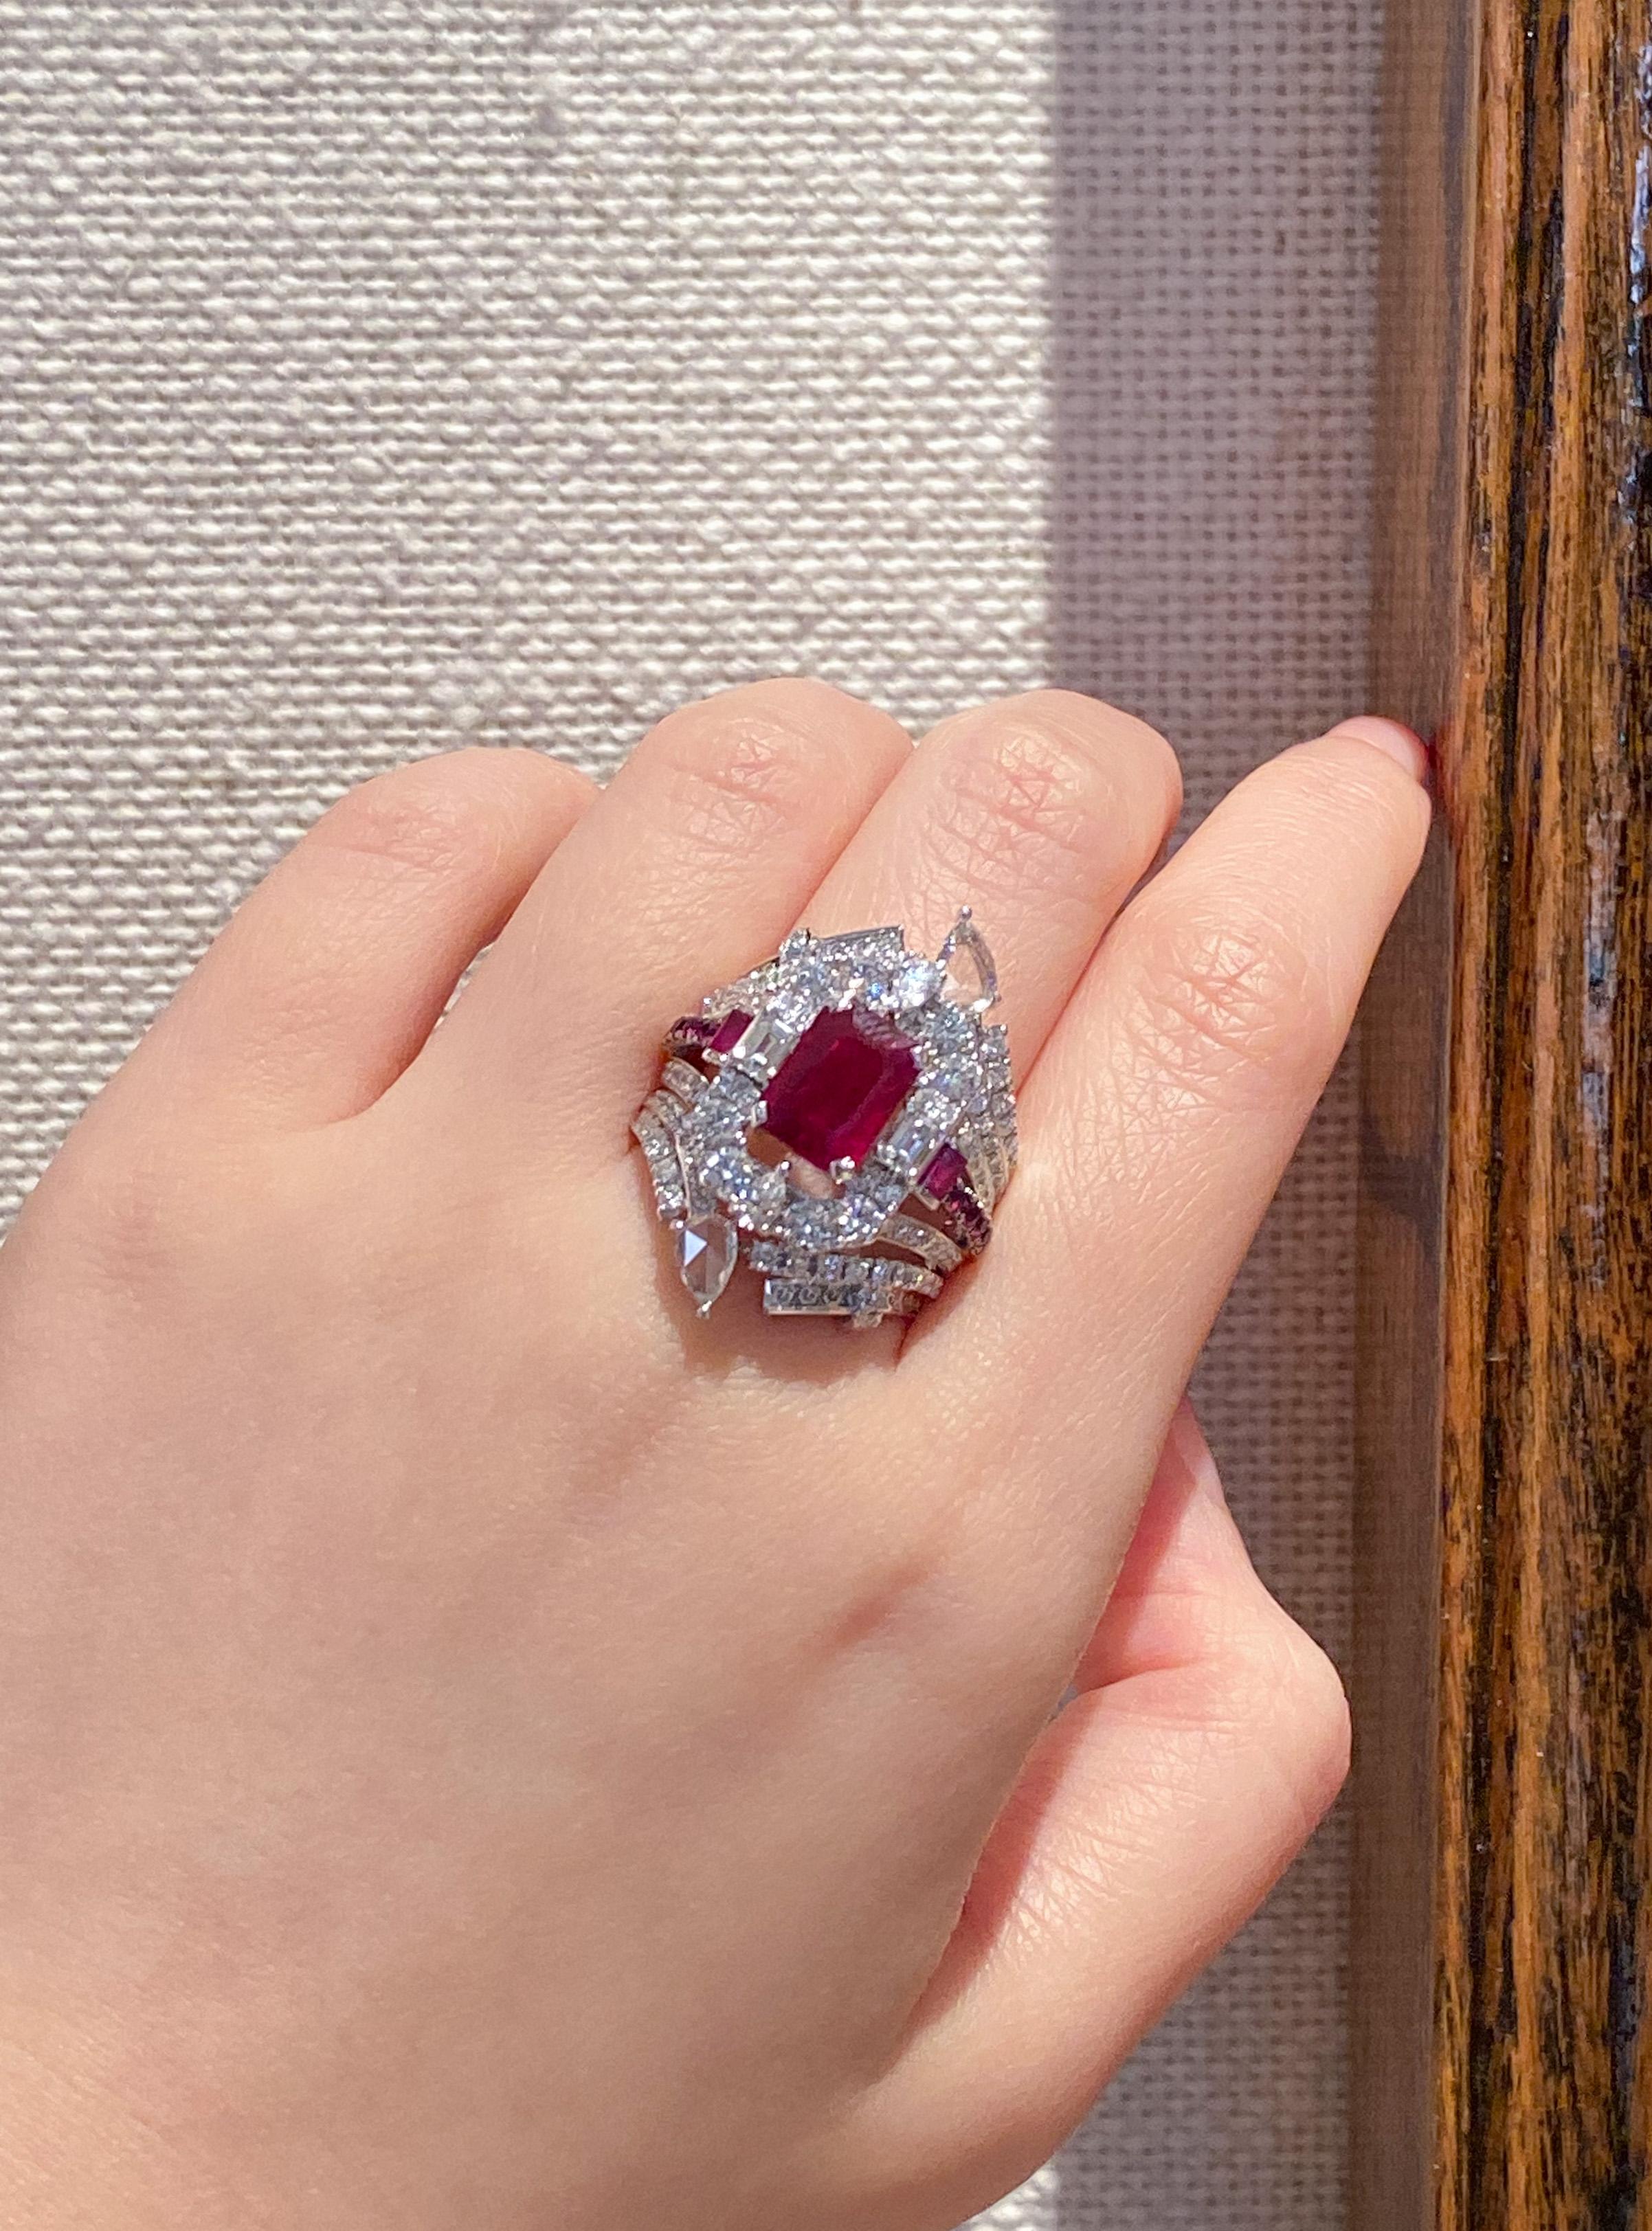 Dilys' 18 karat white gold transformable cocktail ring is set with a 2.07 carat GRS-certified Burmese Pigeon's Blood Ruby centre stone, featuring a deep yet transparent red. Transformable and versatile, this ring can be worn simply as a solitaire